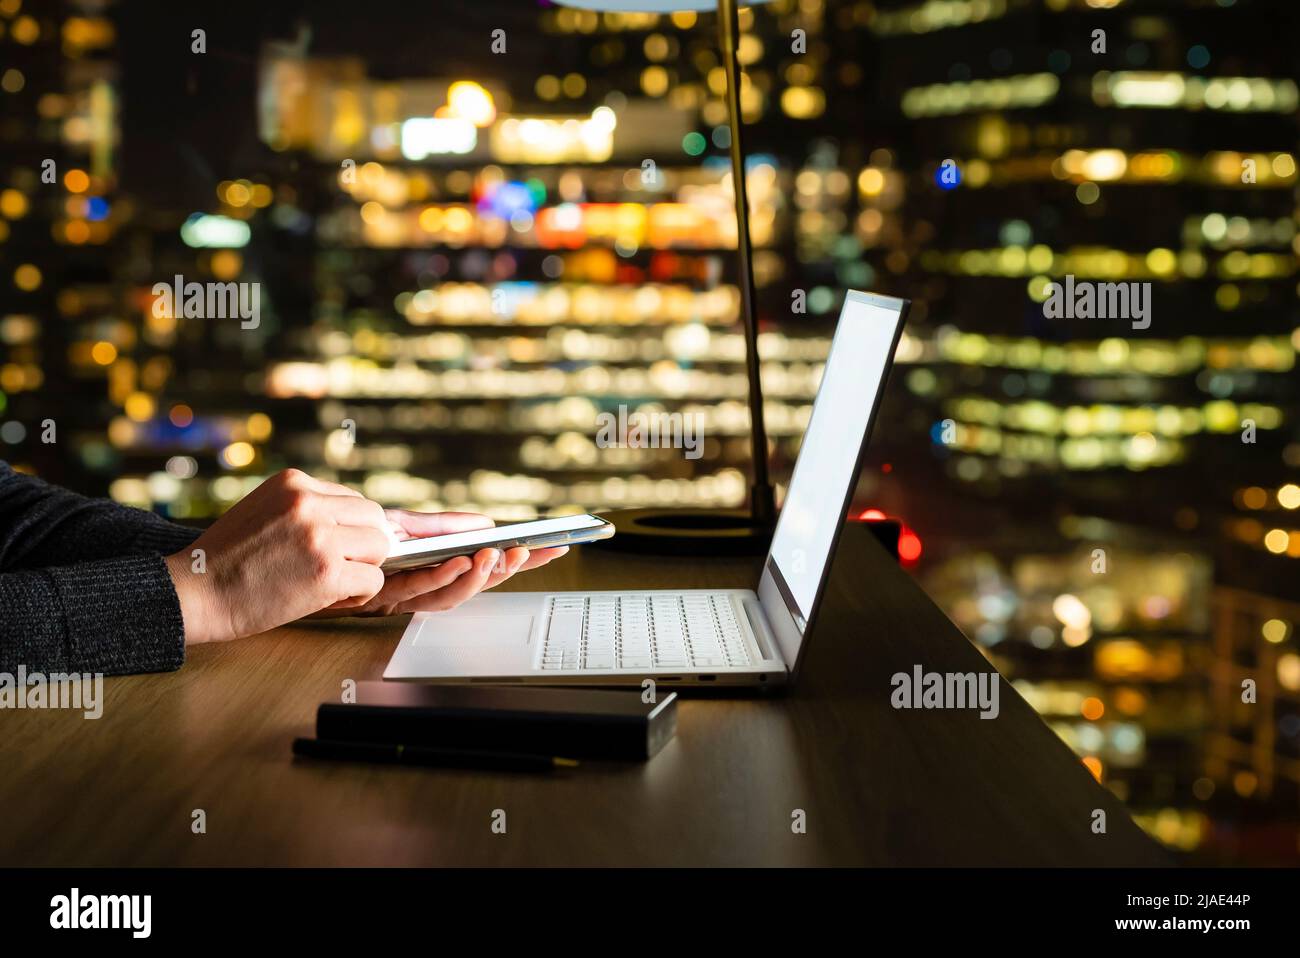 Using smartphone at night, with out focus city skyline background Stock Photo